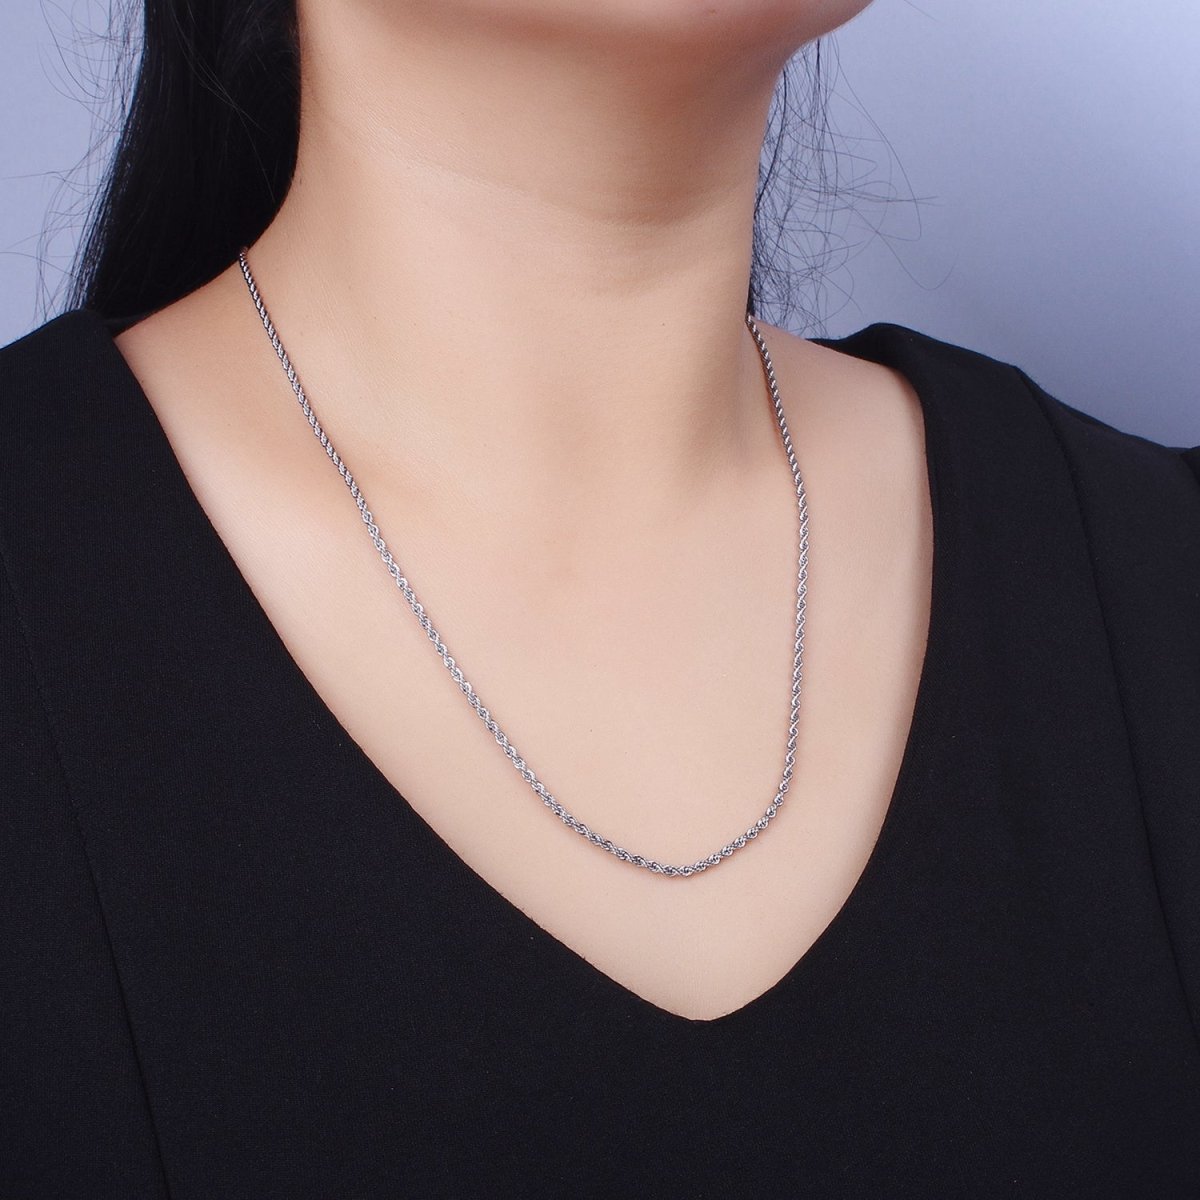 Dainty Gold Rope Chain Necklace Twisted Chain Necklace 17.75", 19.5 Inch + 2 inch Extender | WA-1524 WA-1525 - DLUXCA